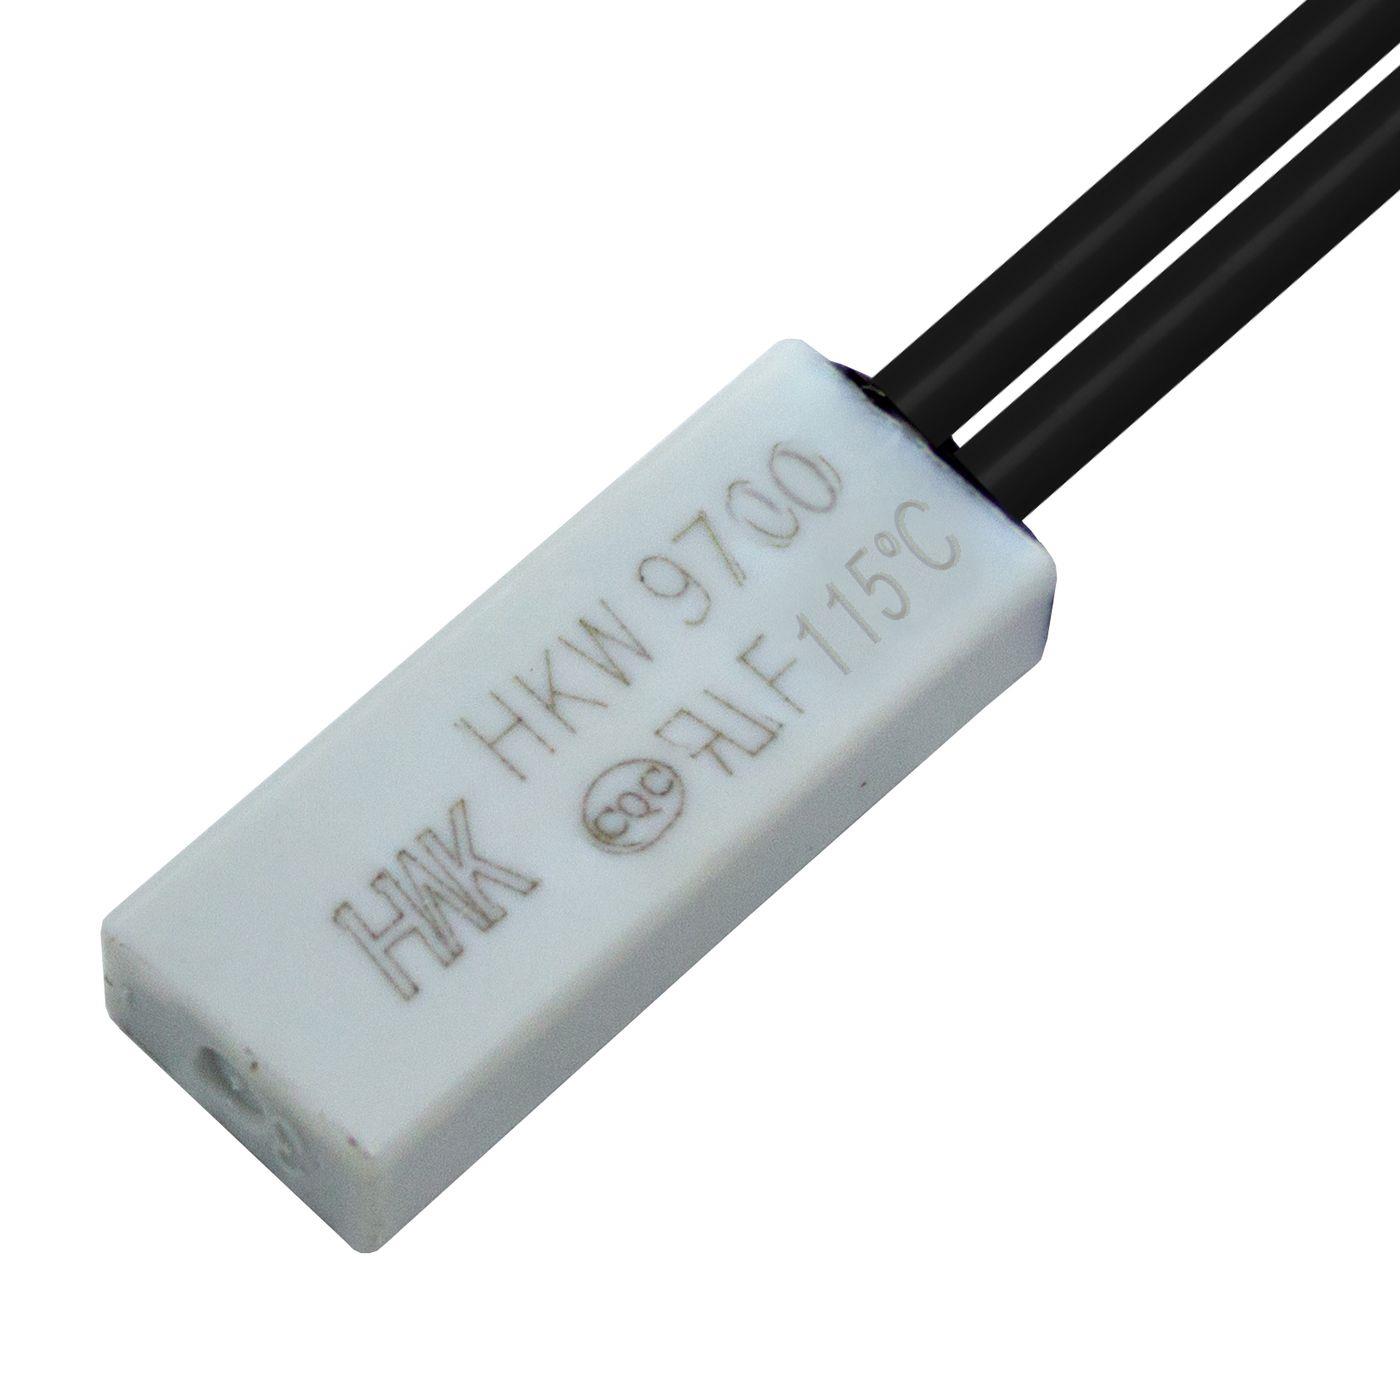 Thermal switch 115°C NO contact 250V 5A Cable Temperature switch thermostat Bimetal Thermal protection